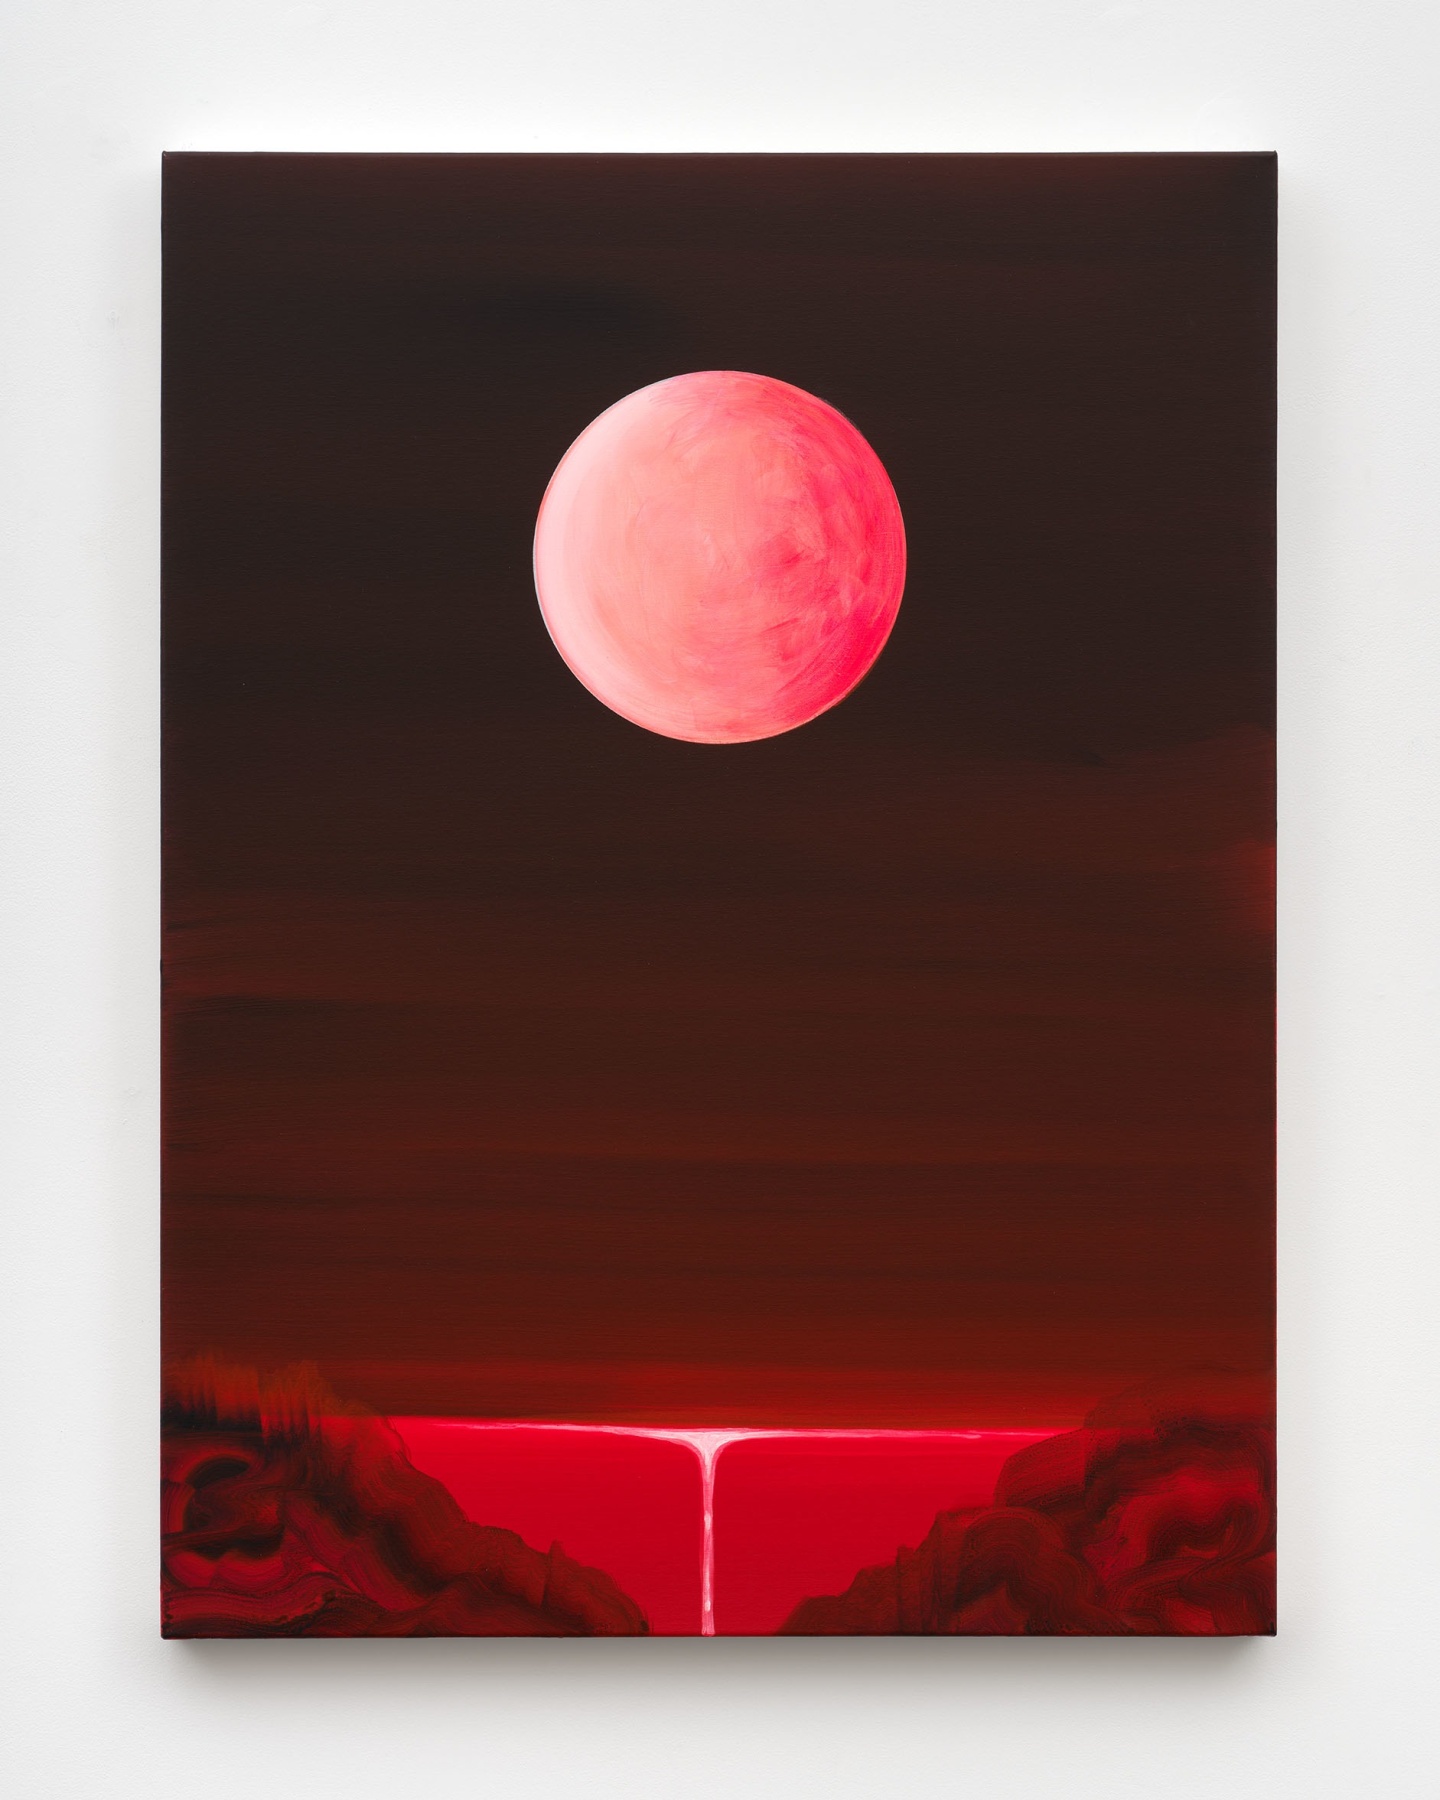 A painting of a red full moon reflected in shining red waters